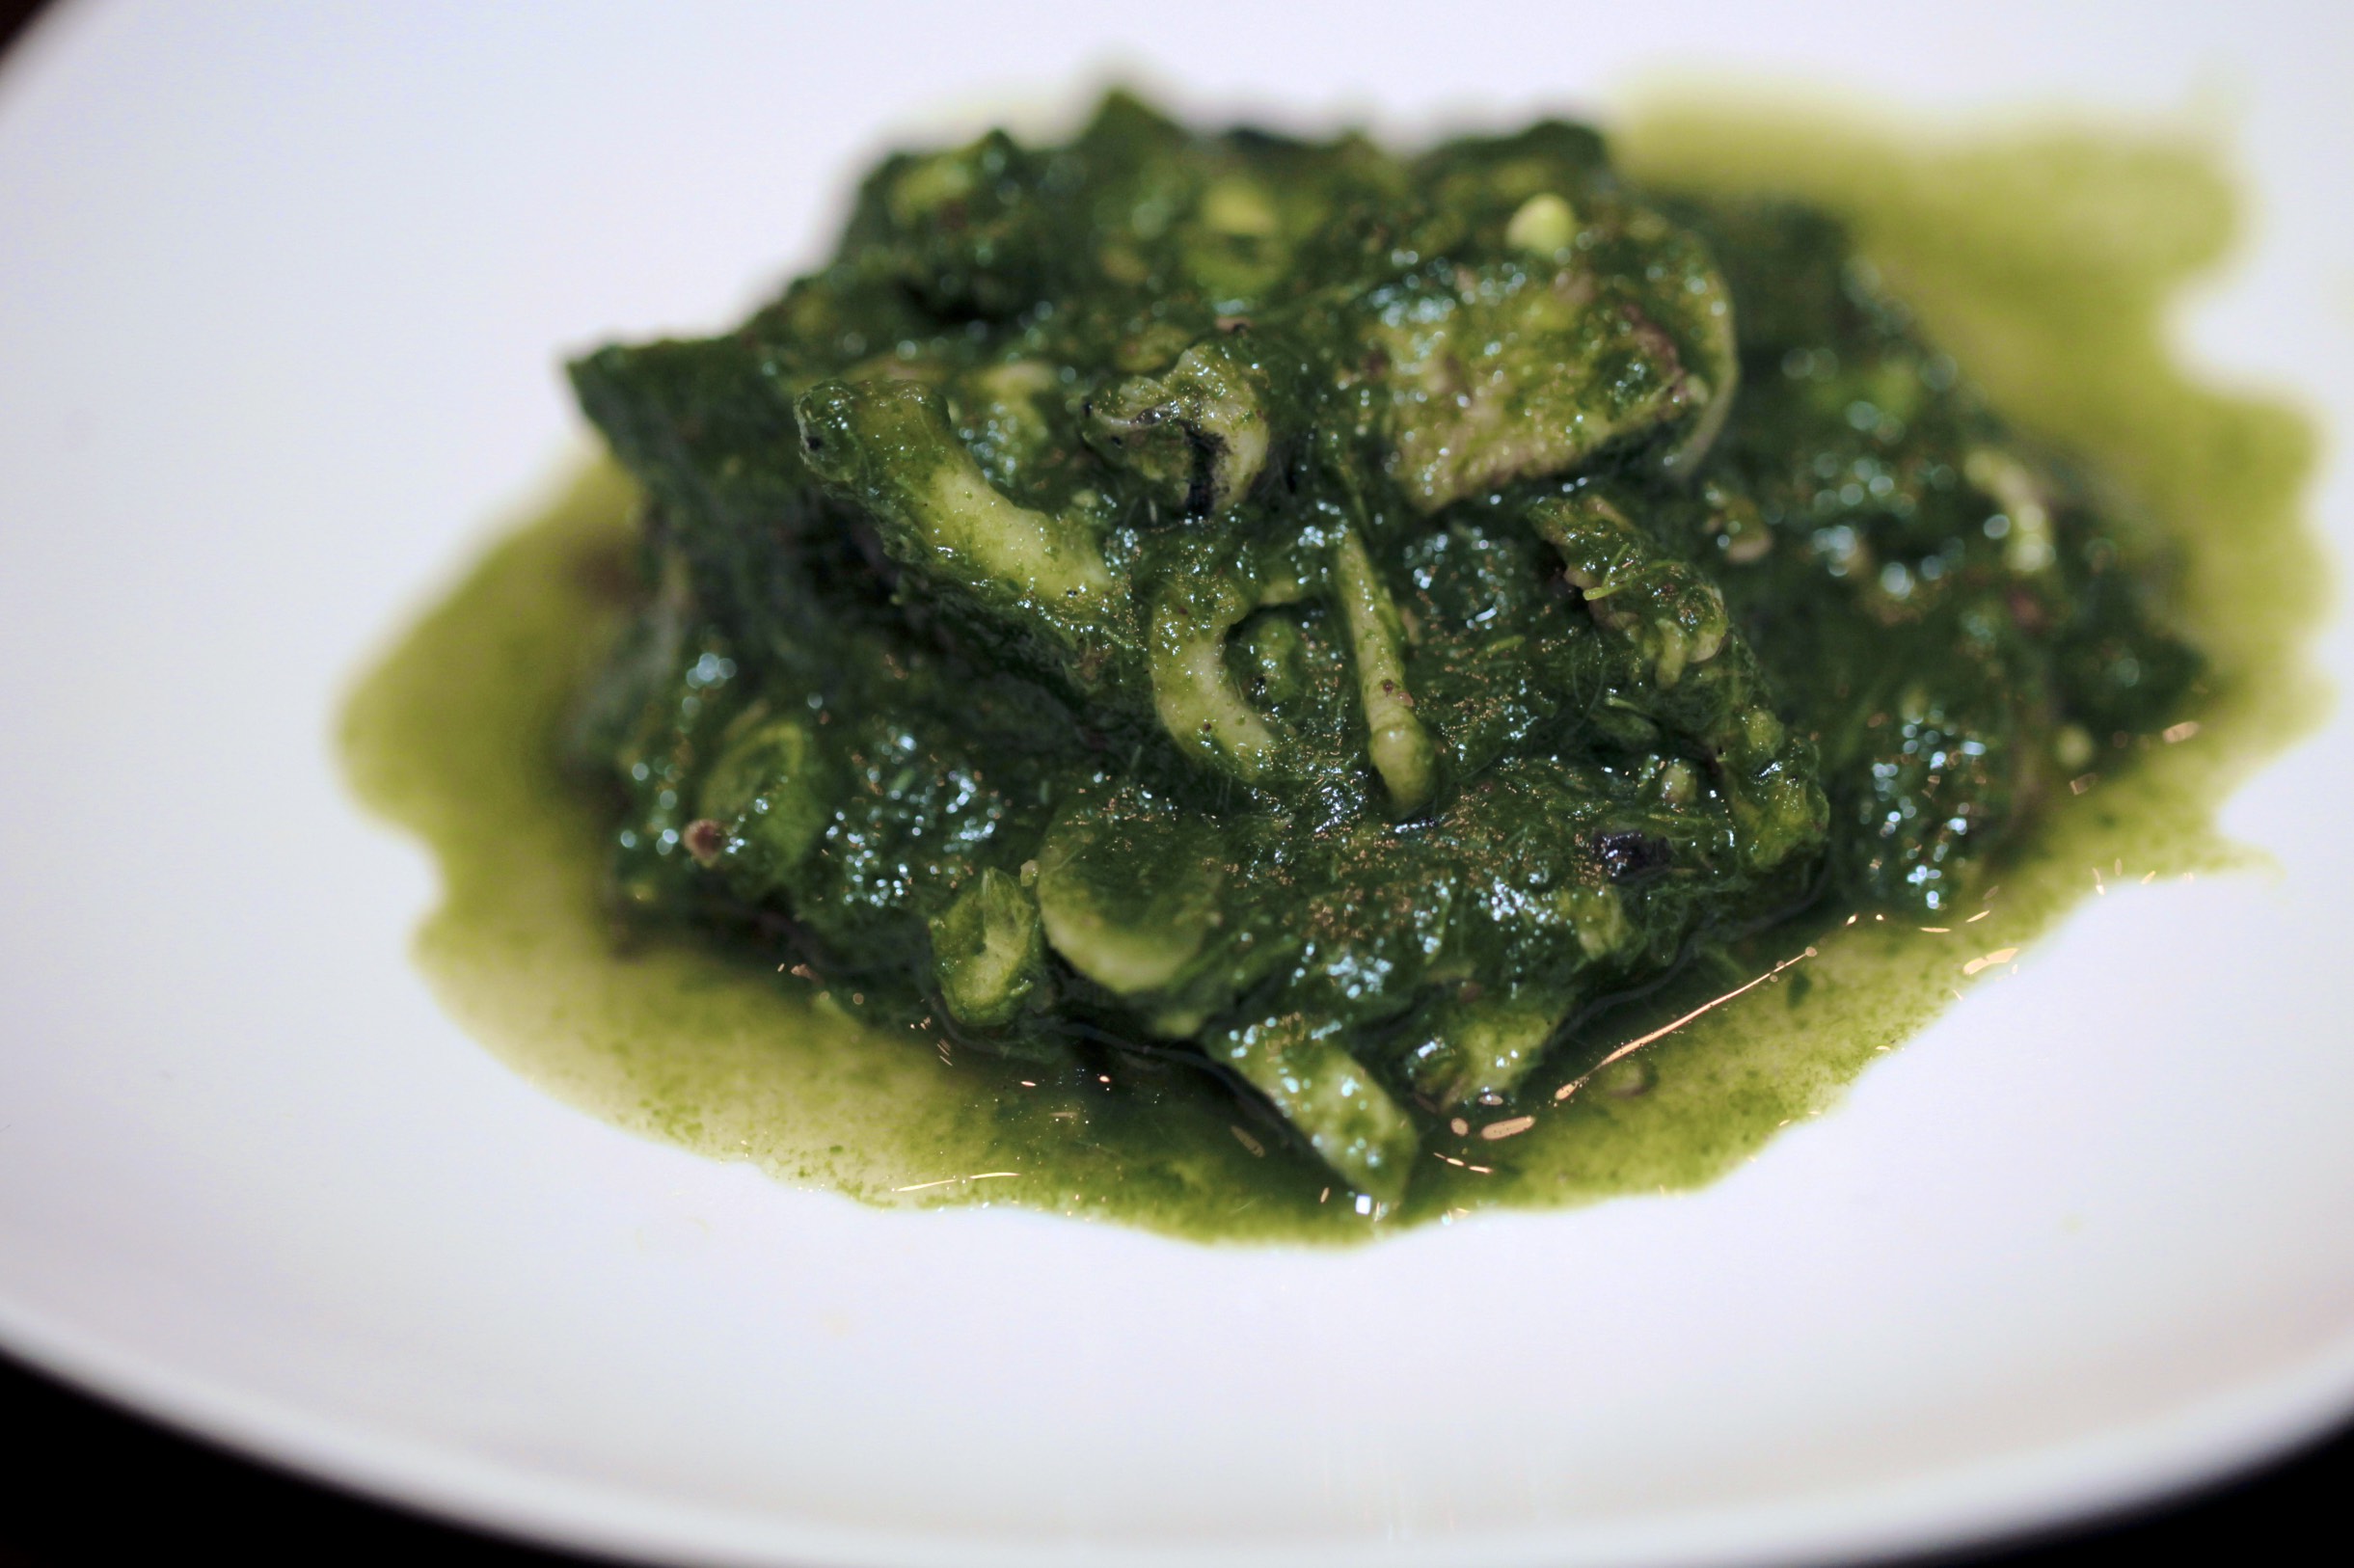 Laab taow: "spinach" with river snails